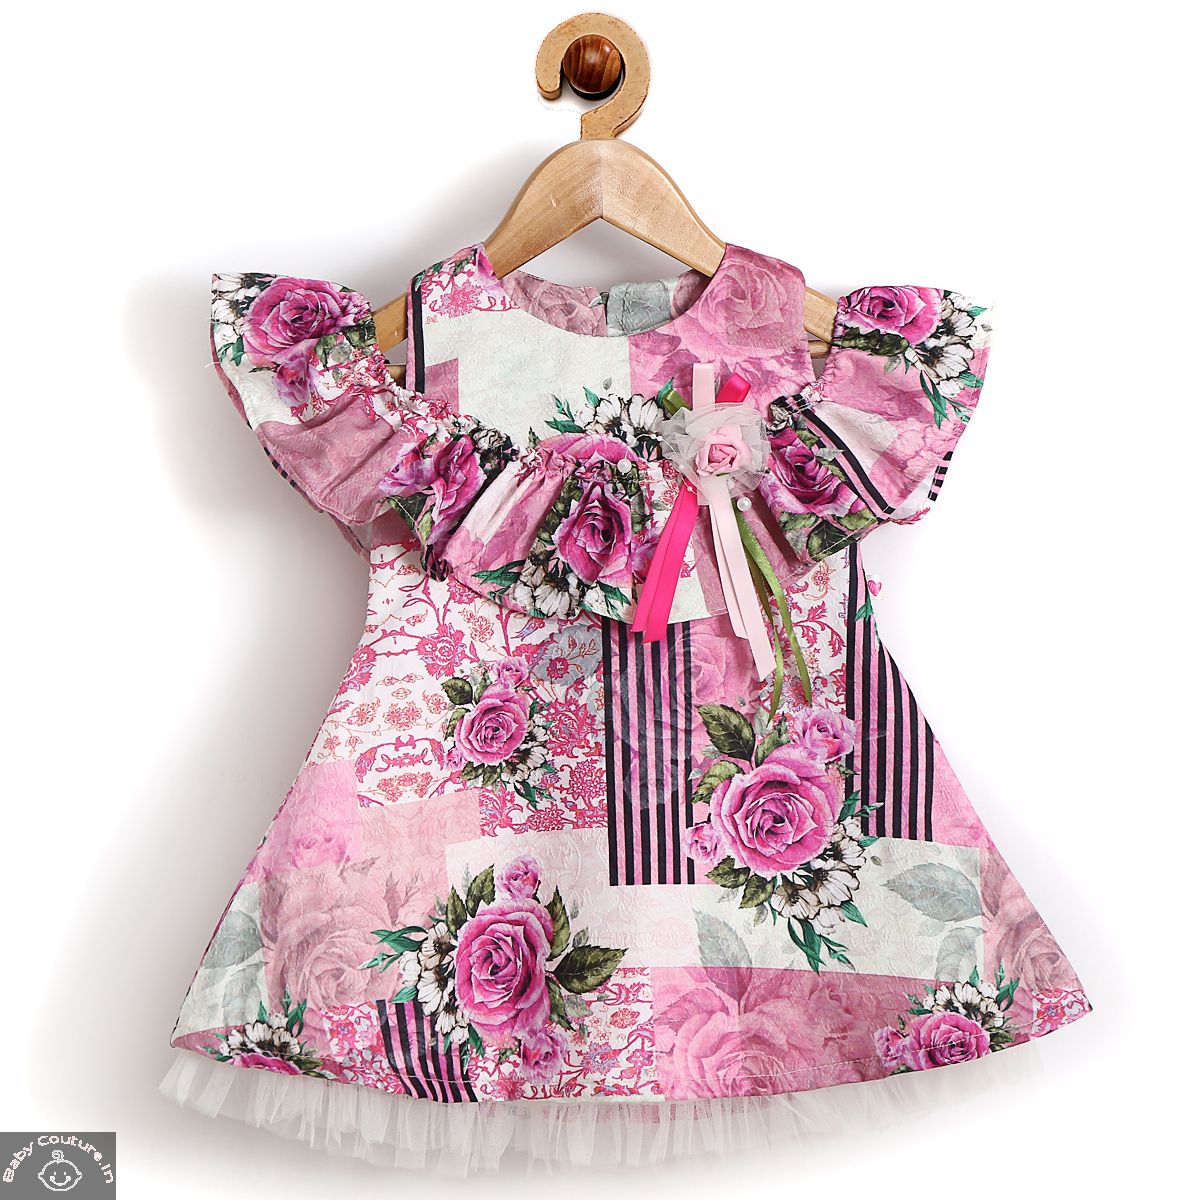 baby frocks party wear online, Dresses for girls, Floral Dresses for girls, Floral Dresses for Women, floral frocks, floral print dress with sleeves, floral print dresses for weddings, Girls floral dress online, online party dresses for girls